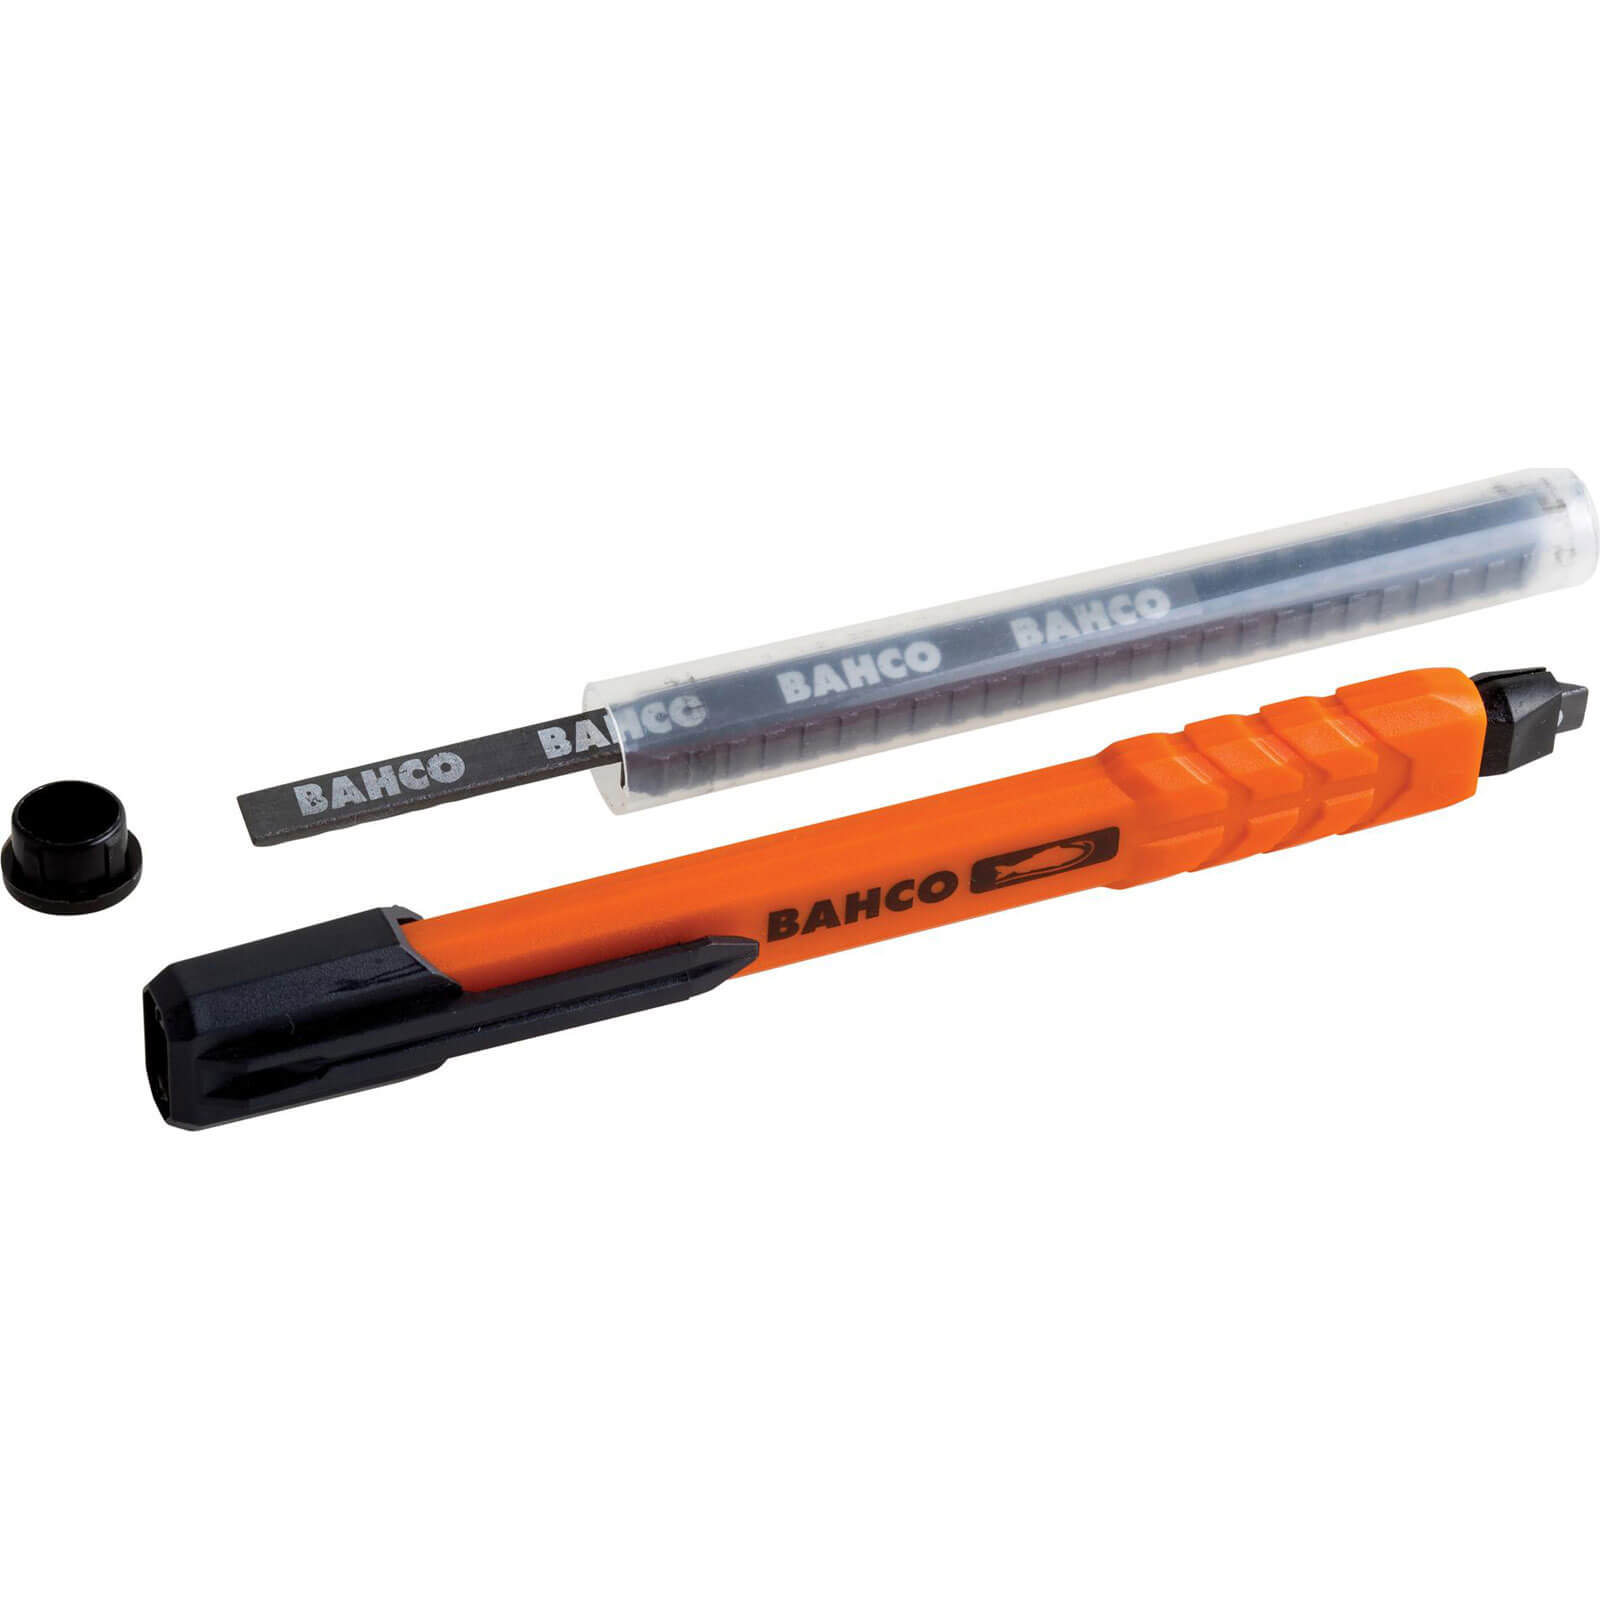 Image of Bahco Mechanical Carpenters HB Pencil